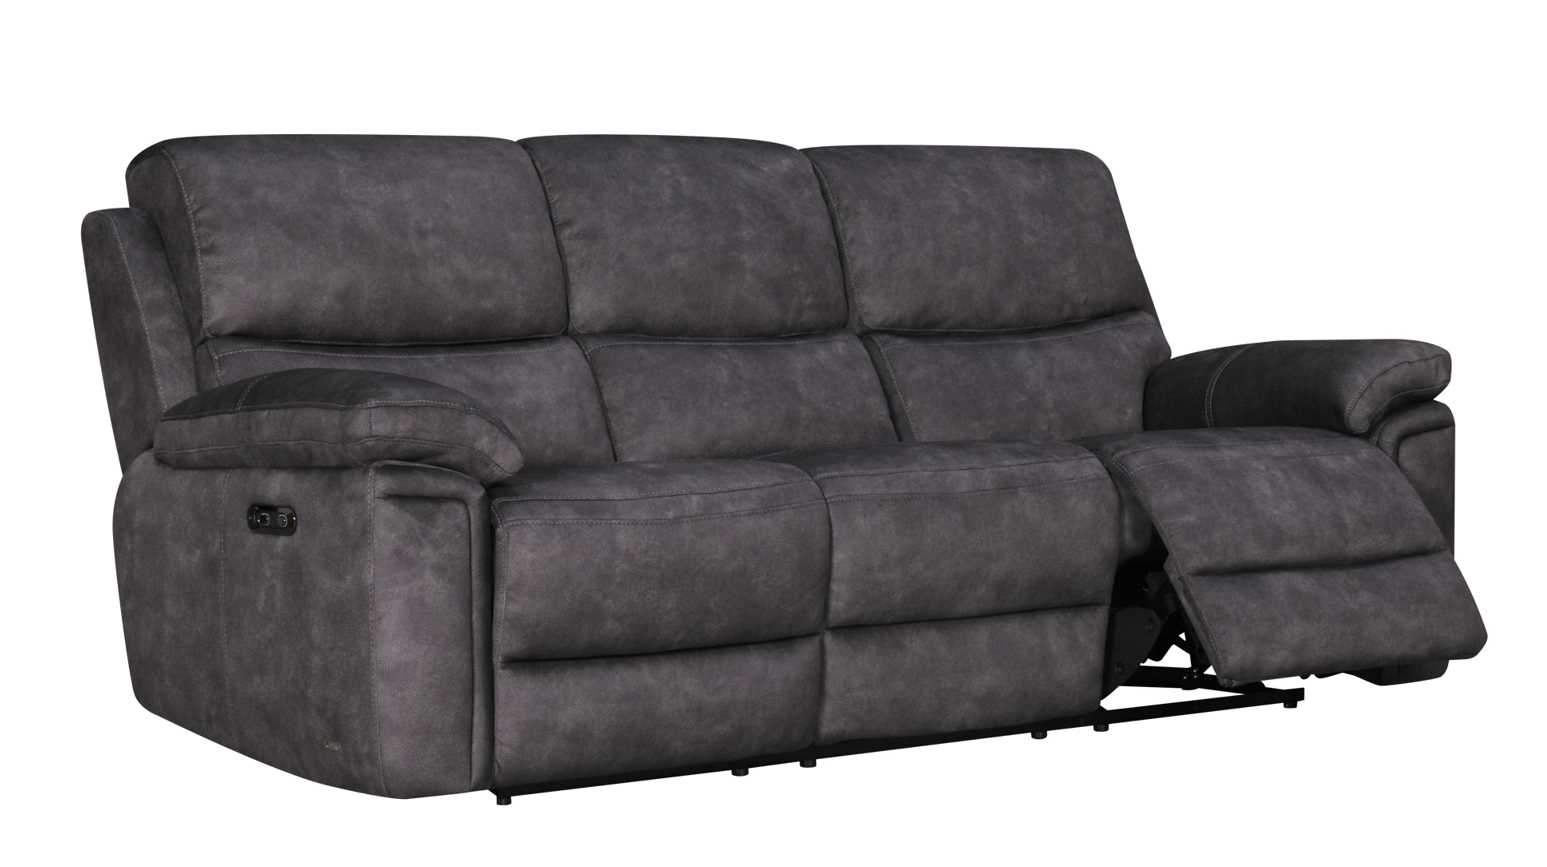 Classic Comfort Redefined Embracing the Relaxation of Chesterfield Recliner Furniture  %Post Title